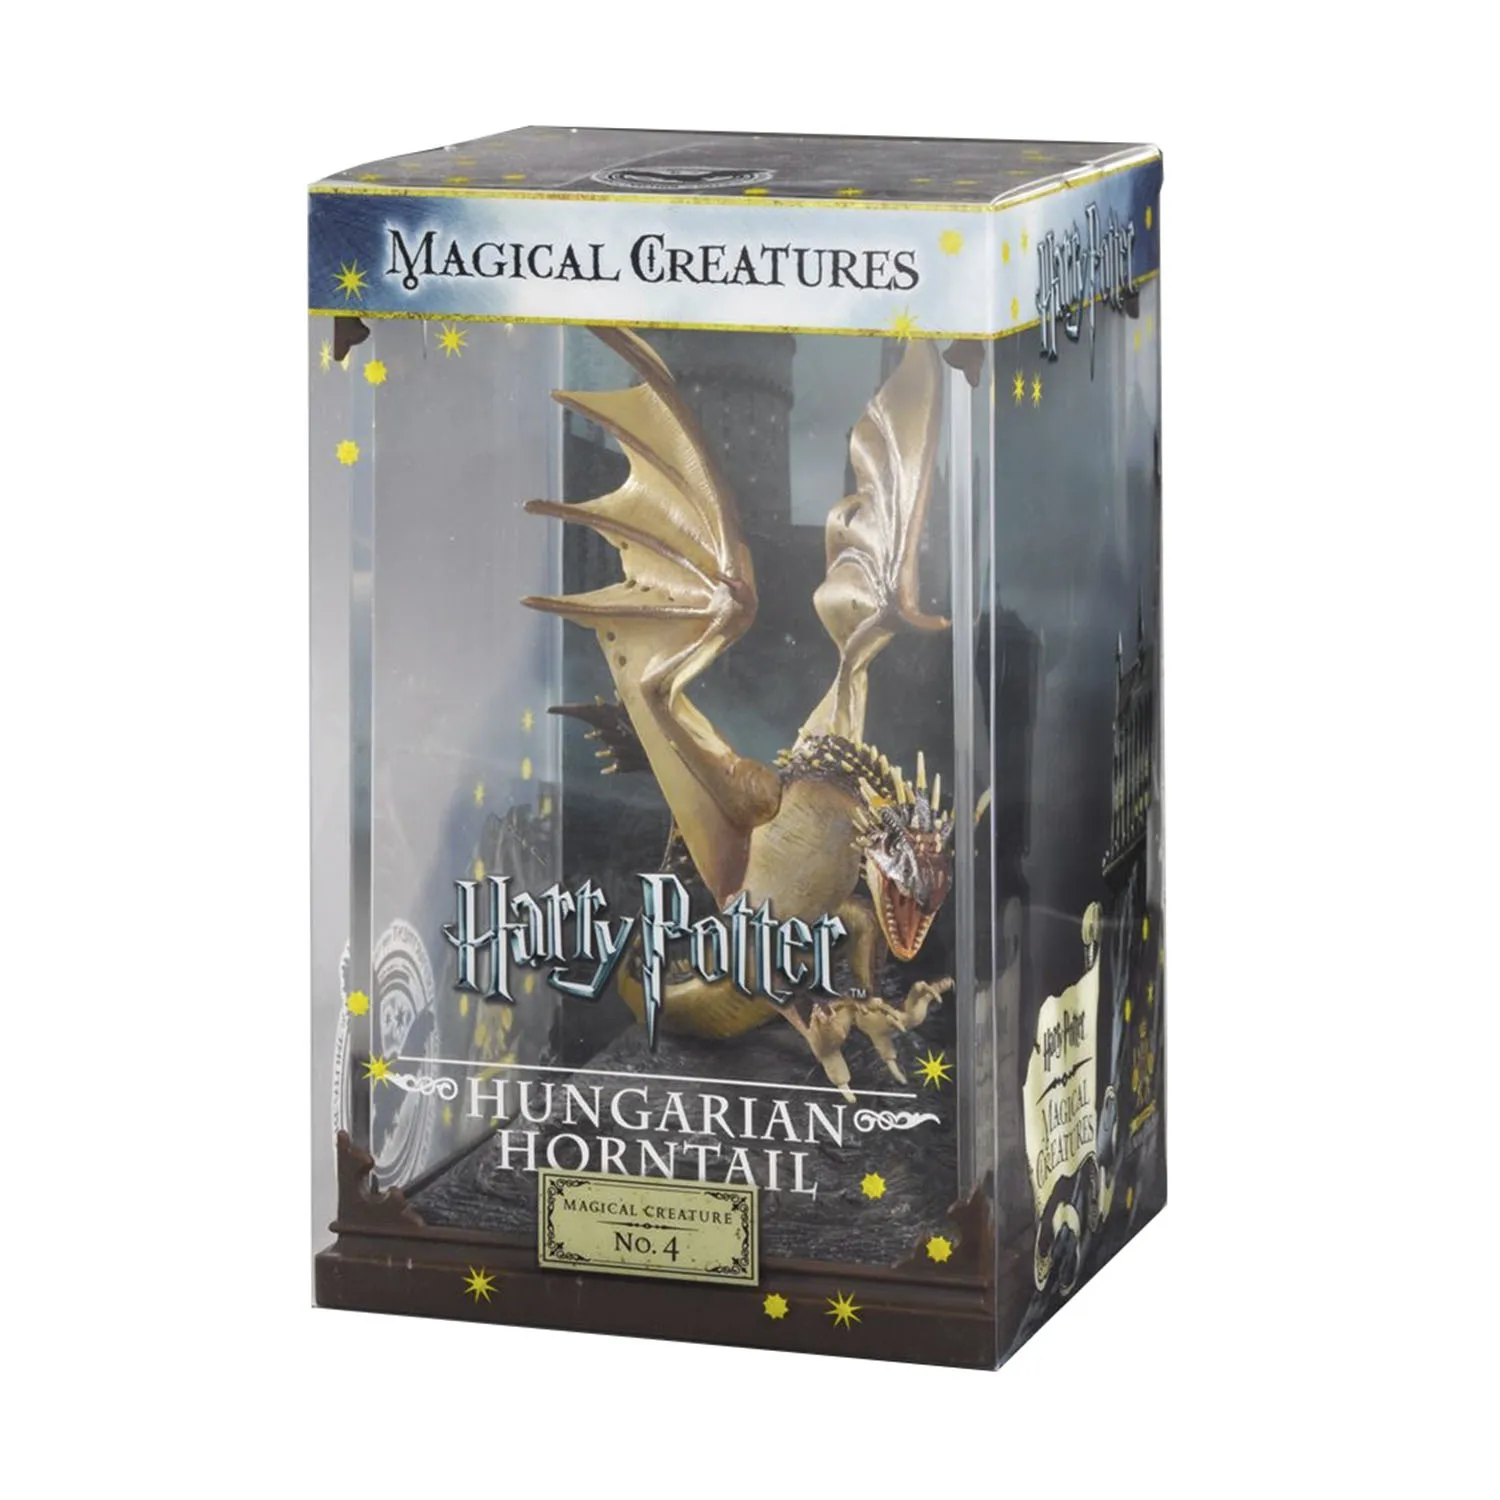 Magic collection. Magical creatures Harry Potter. Wizarding World Figurine collection.